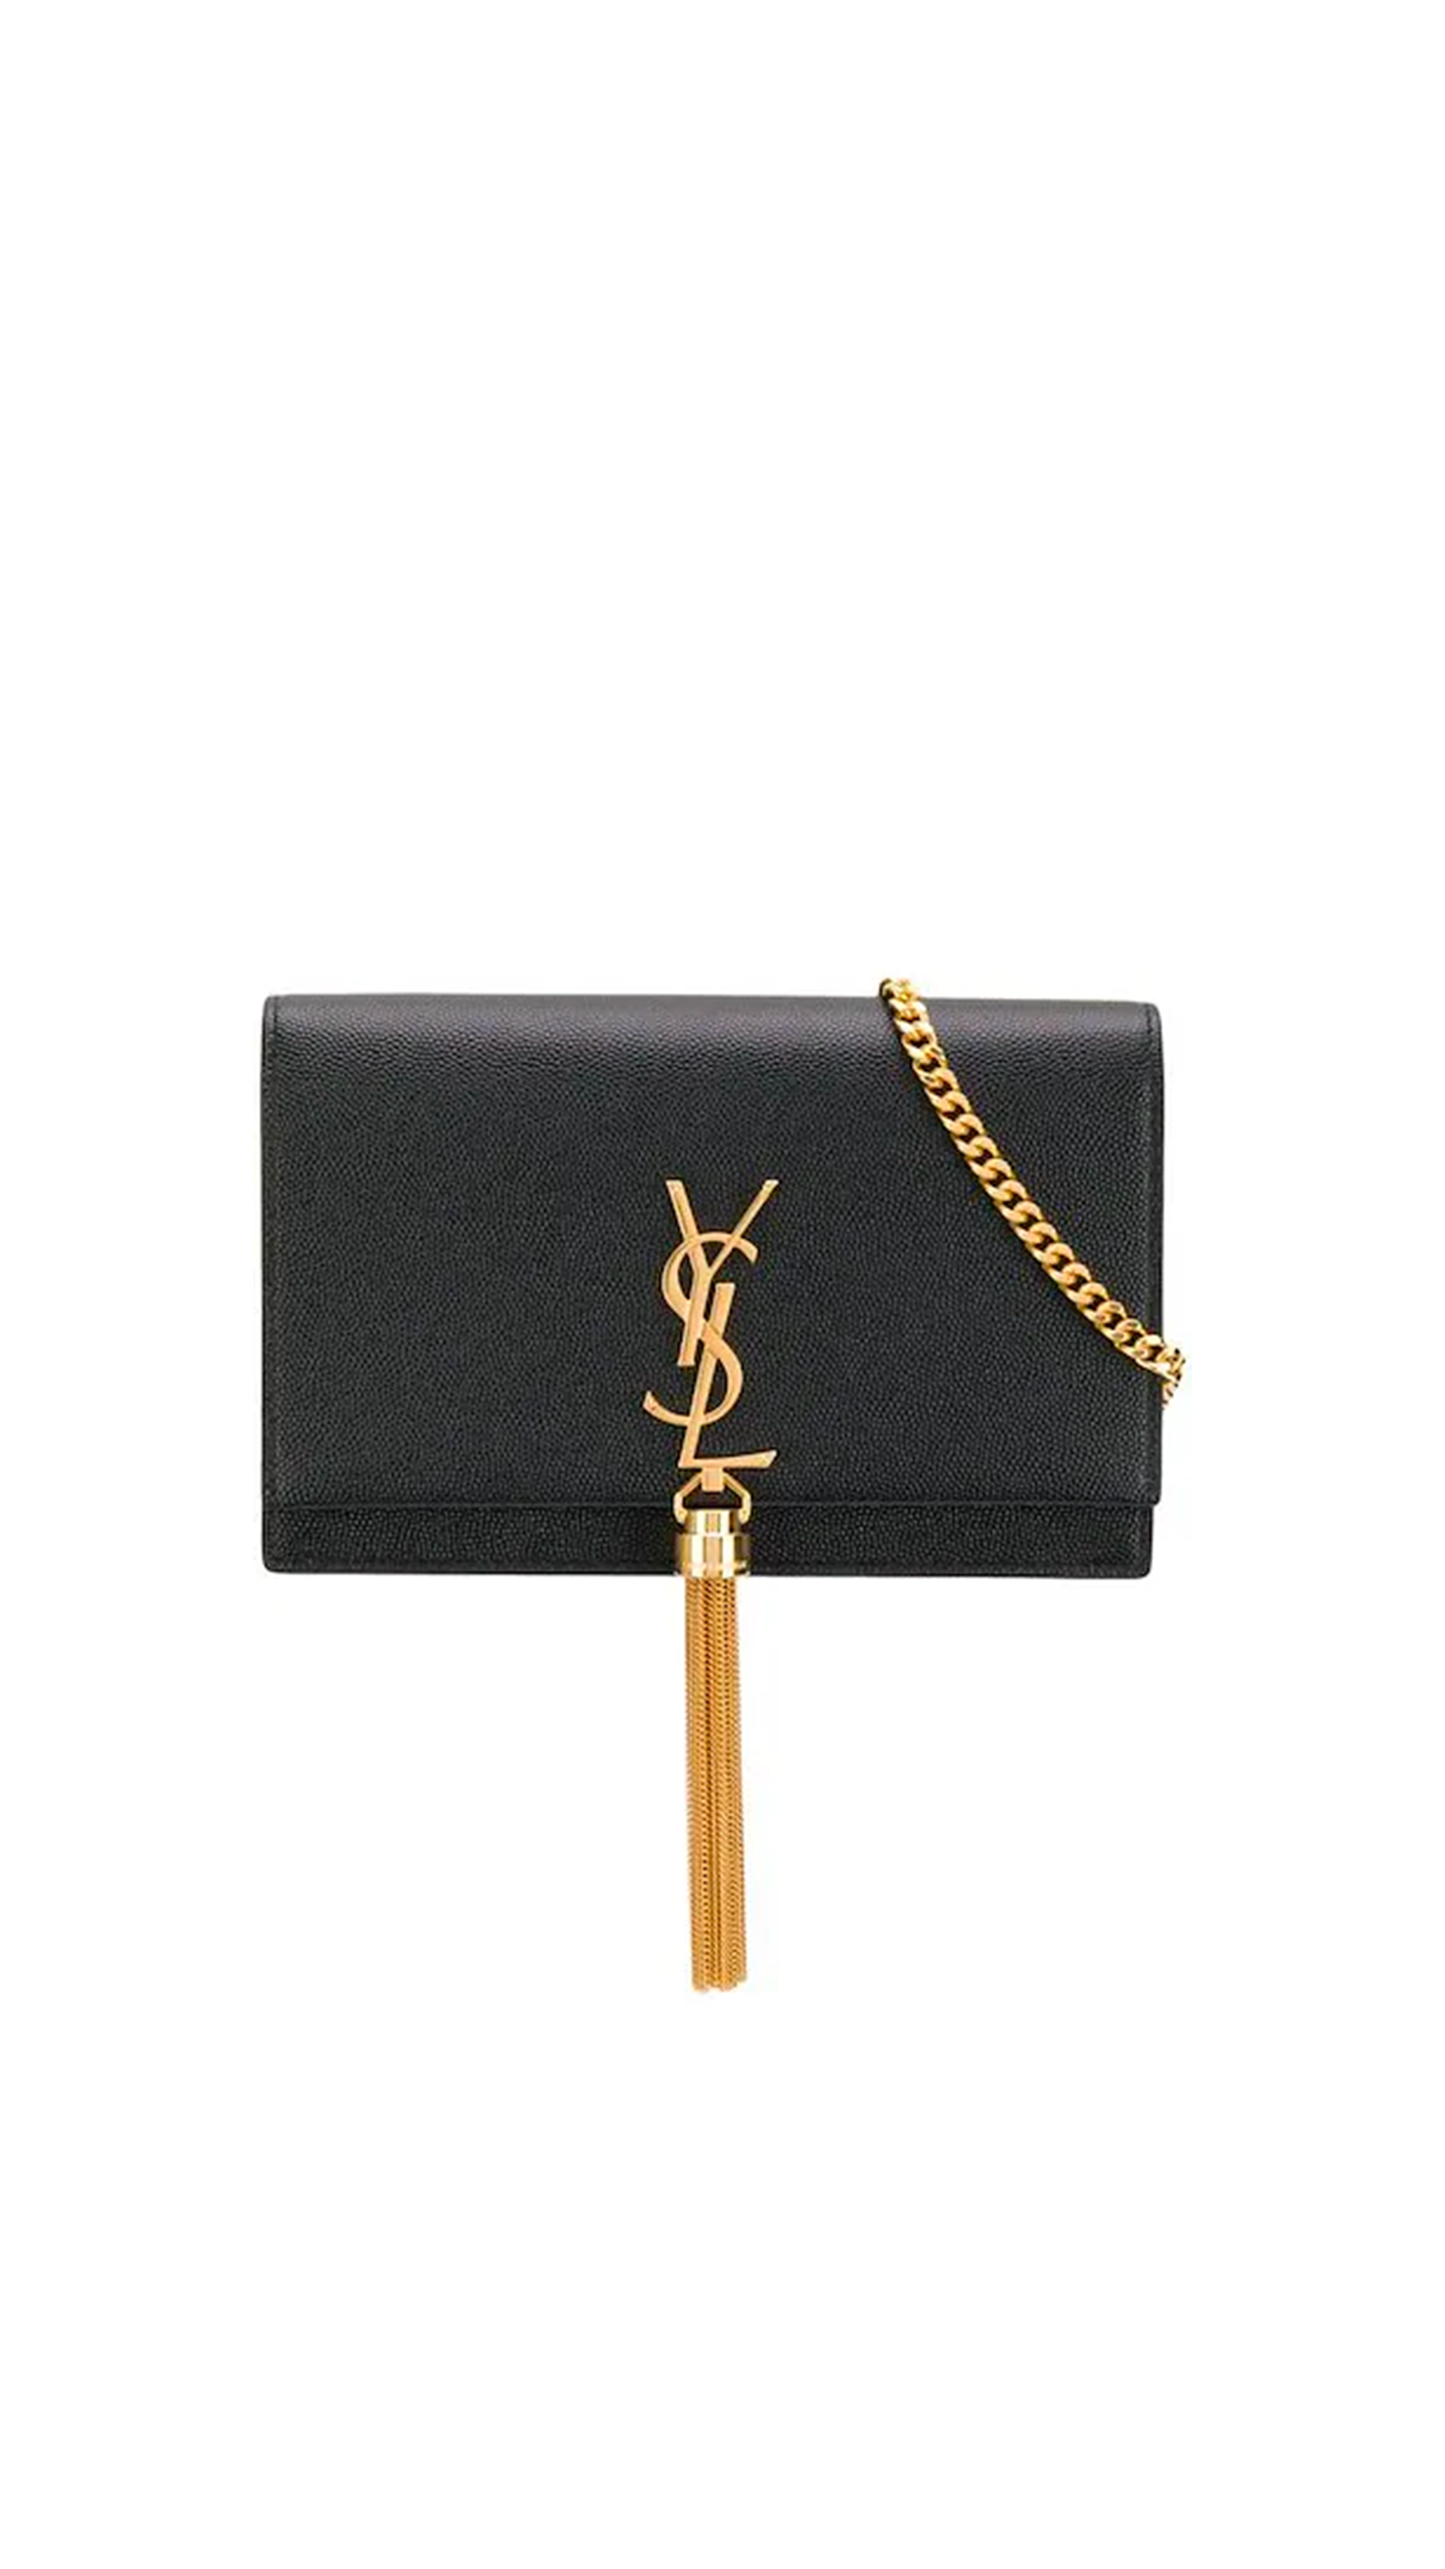 Kate Chain Wallet With Tassel in Grain De Poudre Embossed Leather - Black